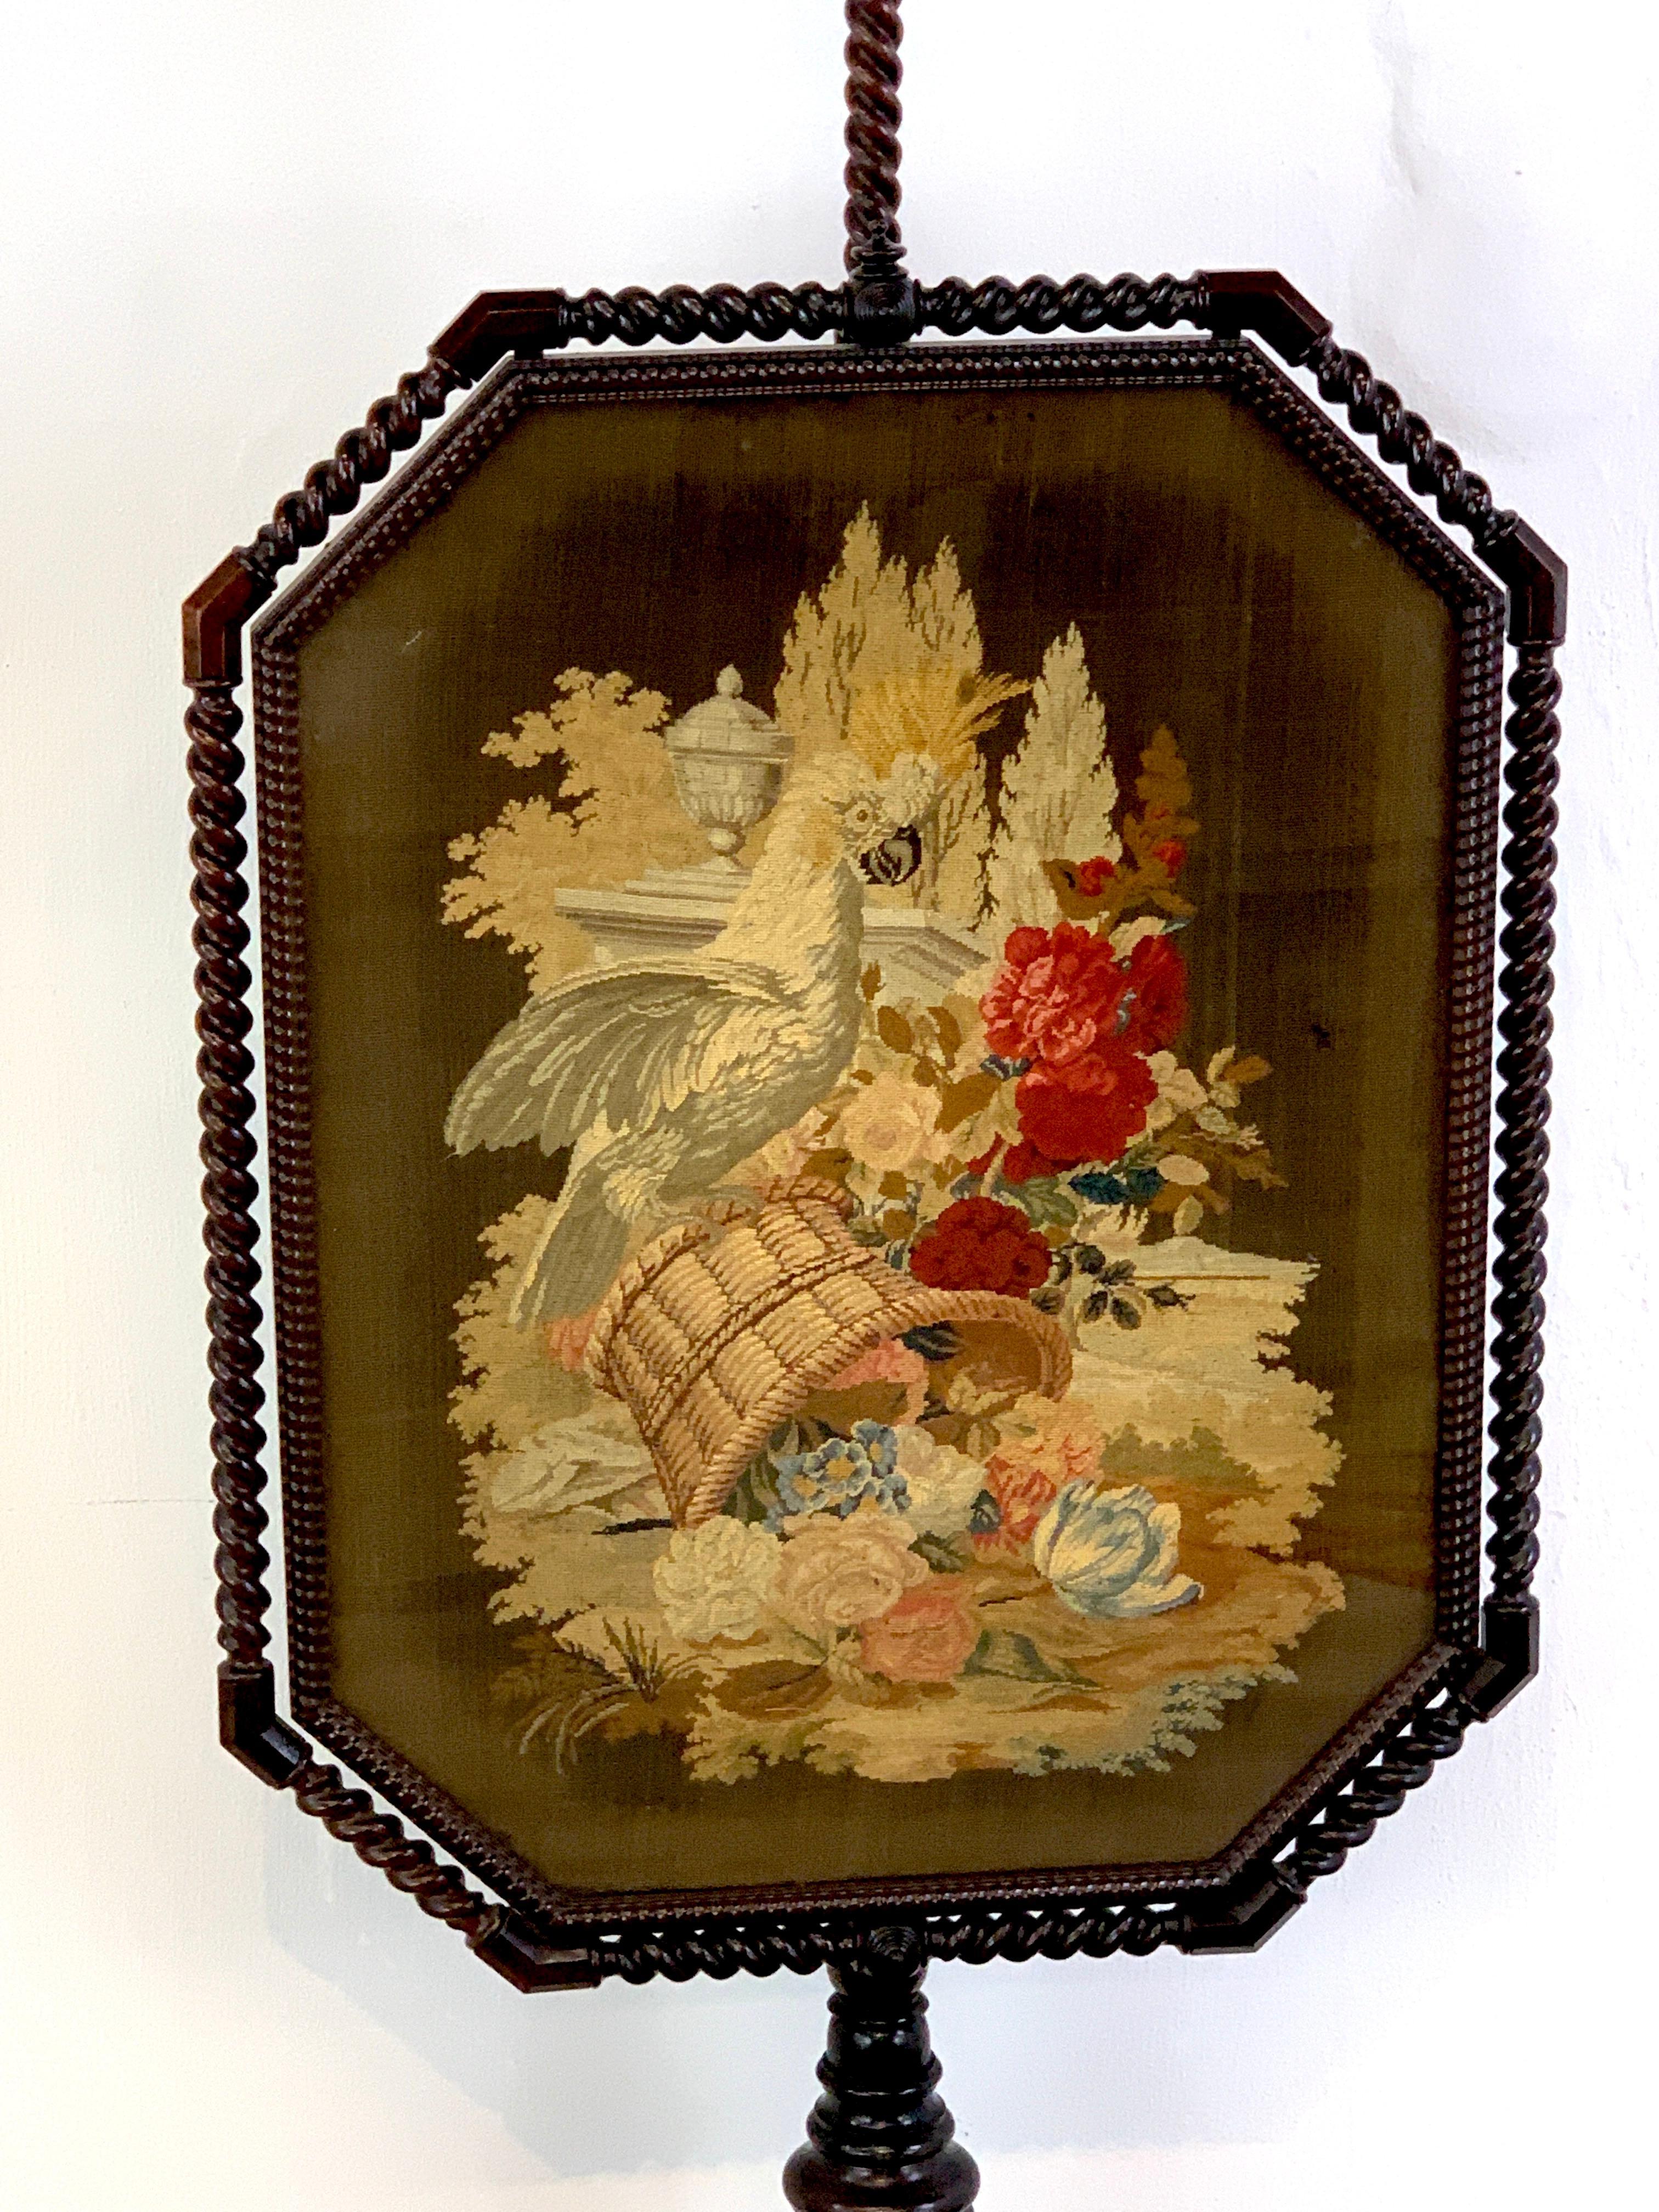 English Exquisite 19th Century Rosewood & Needlepoint Cockatoo in Landscape Firescreen